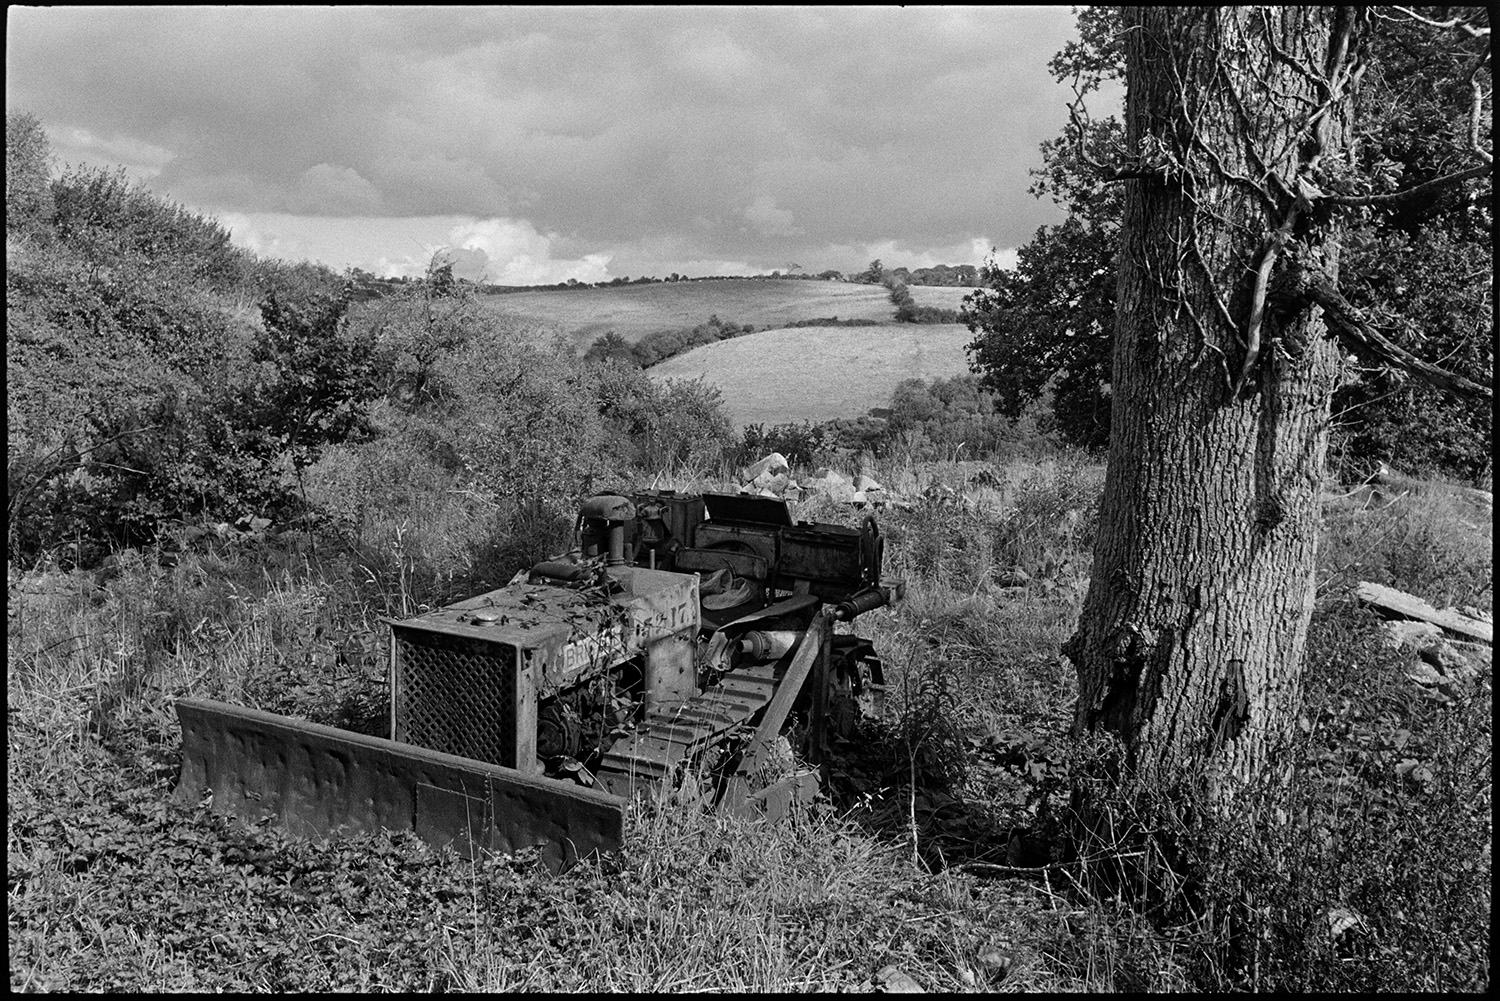 Dog barking in farm lane with parked harrow, old bulldozer. 
[An old bulldozer parked by a tree in a field at Spittle Farm, Chulmleigh. Fields and hedgerows can be seen in the background.]